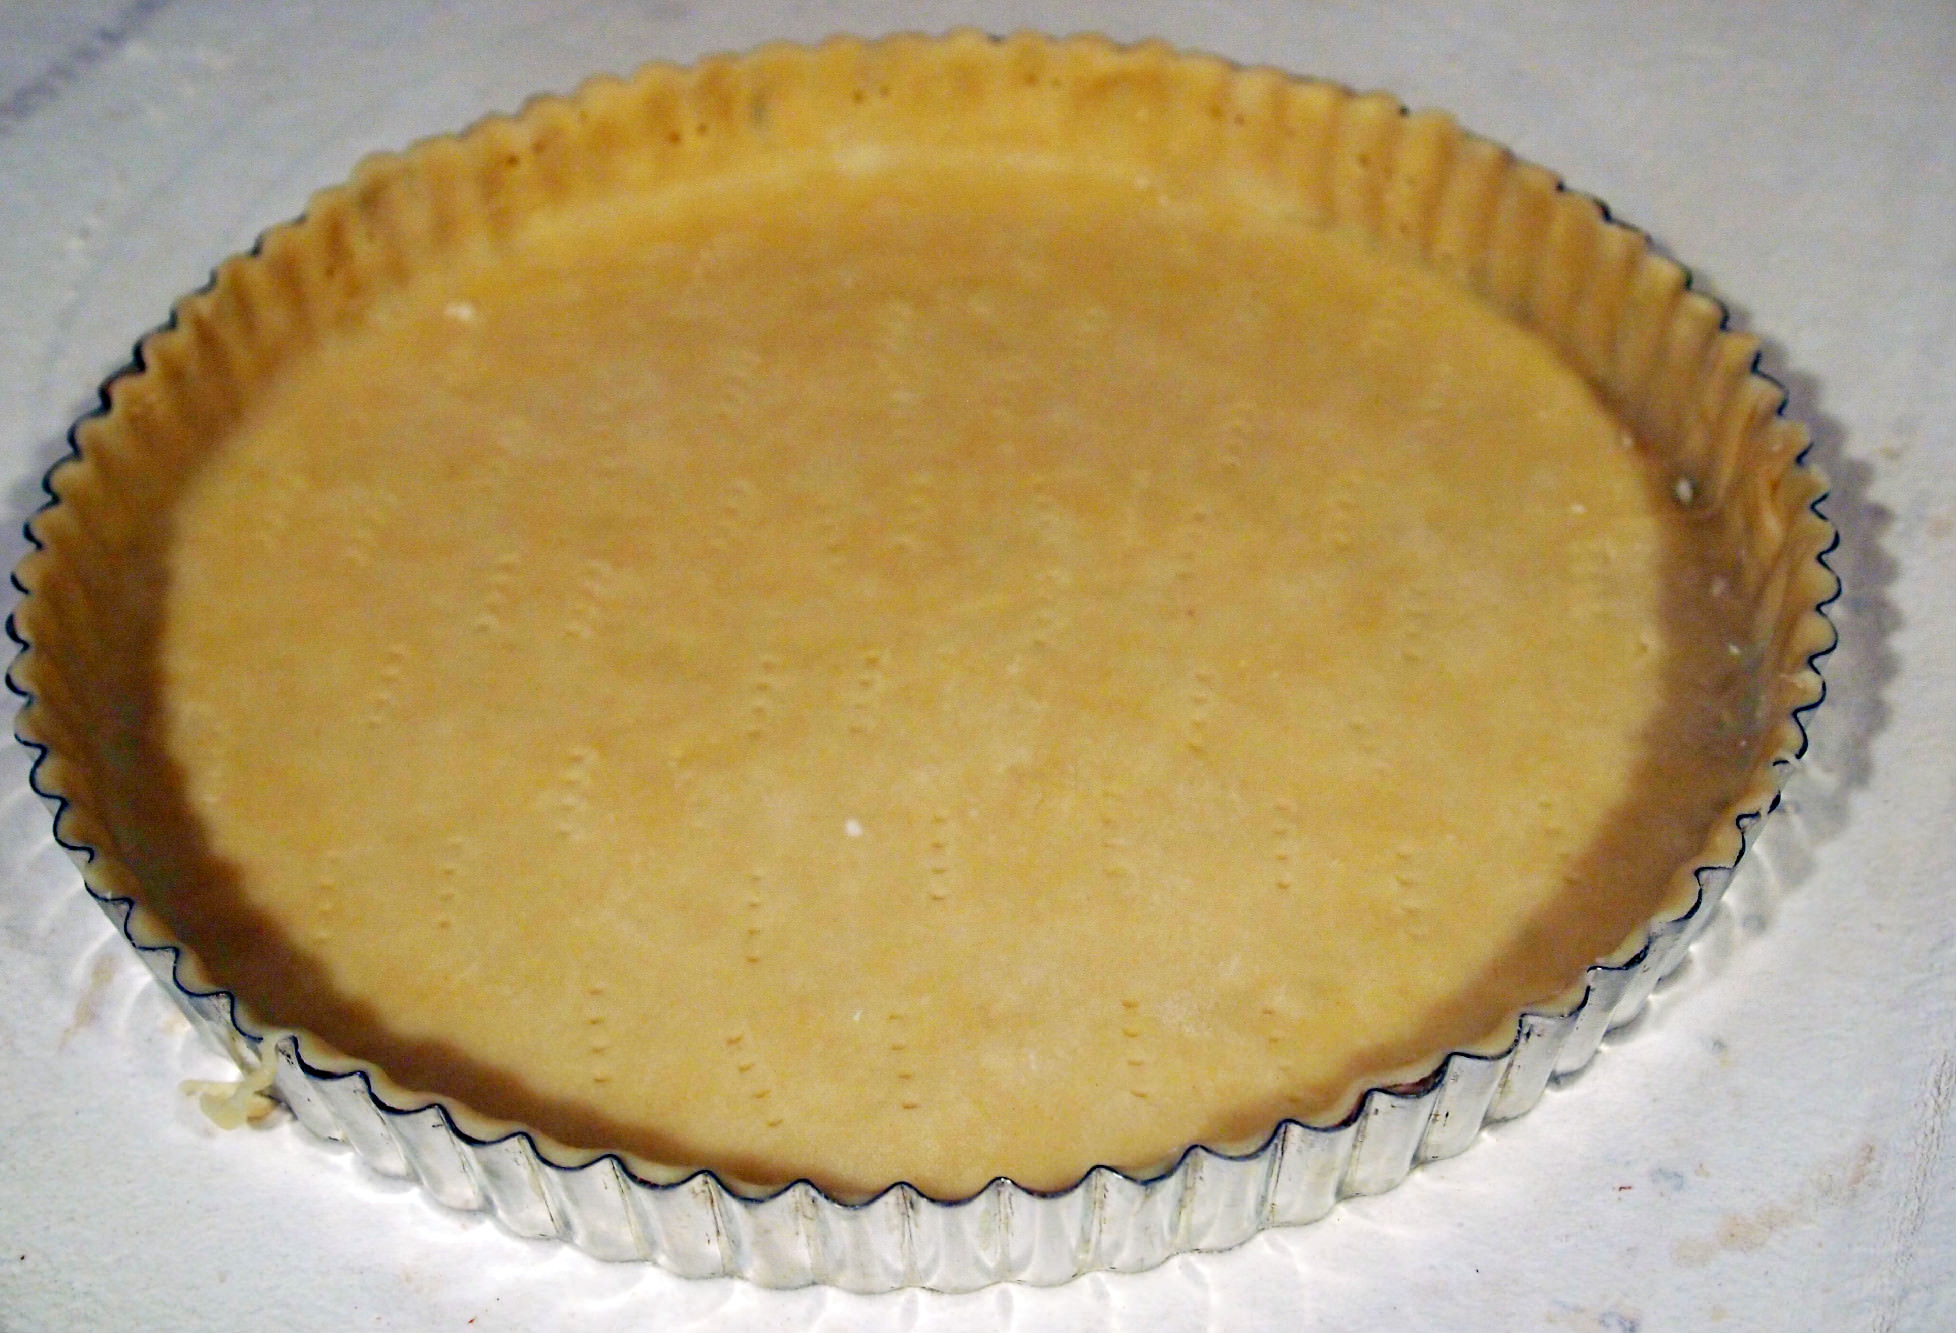 tart pan filled with pastry dough